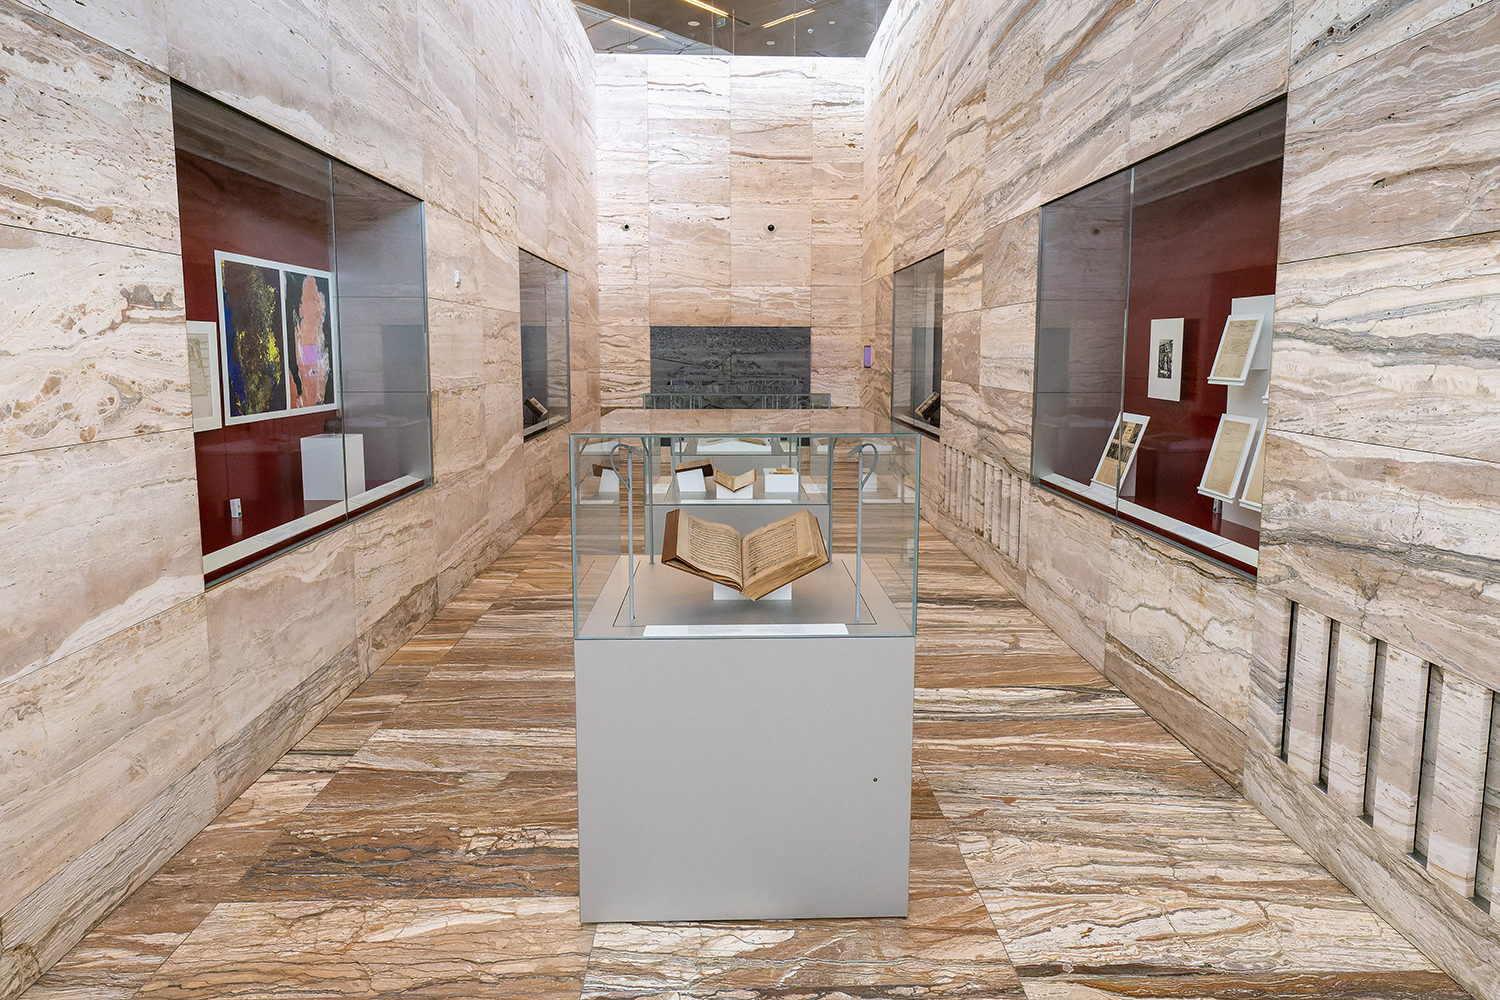 The Heritage section of Qatar National Library 